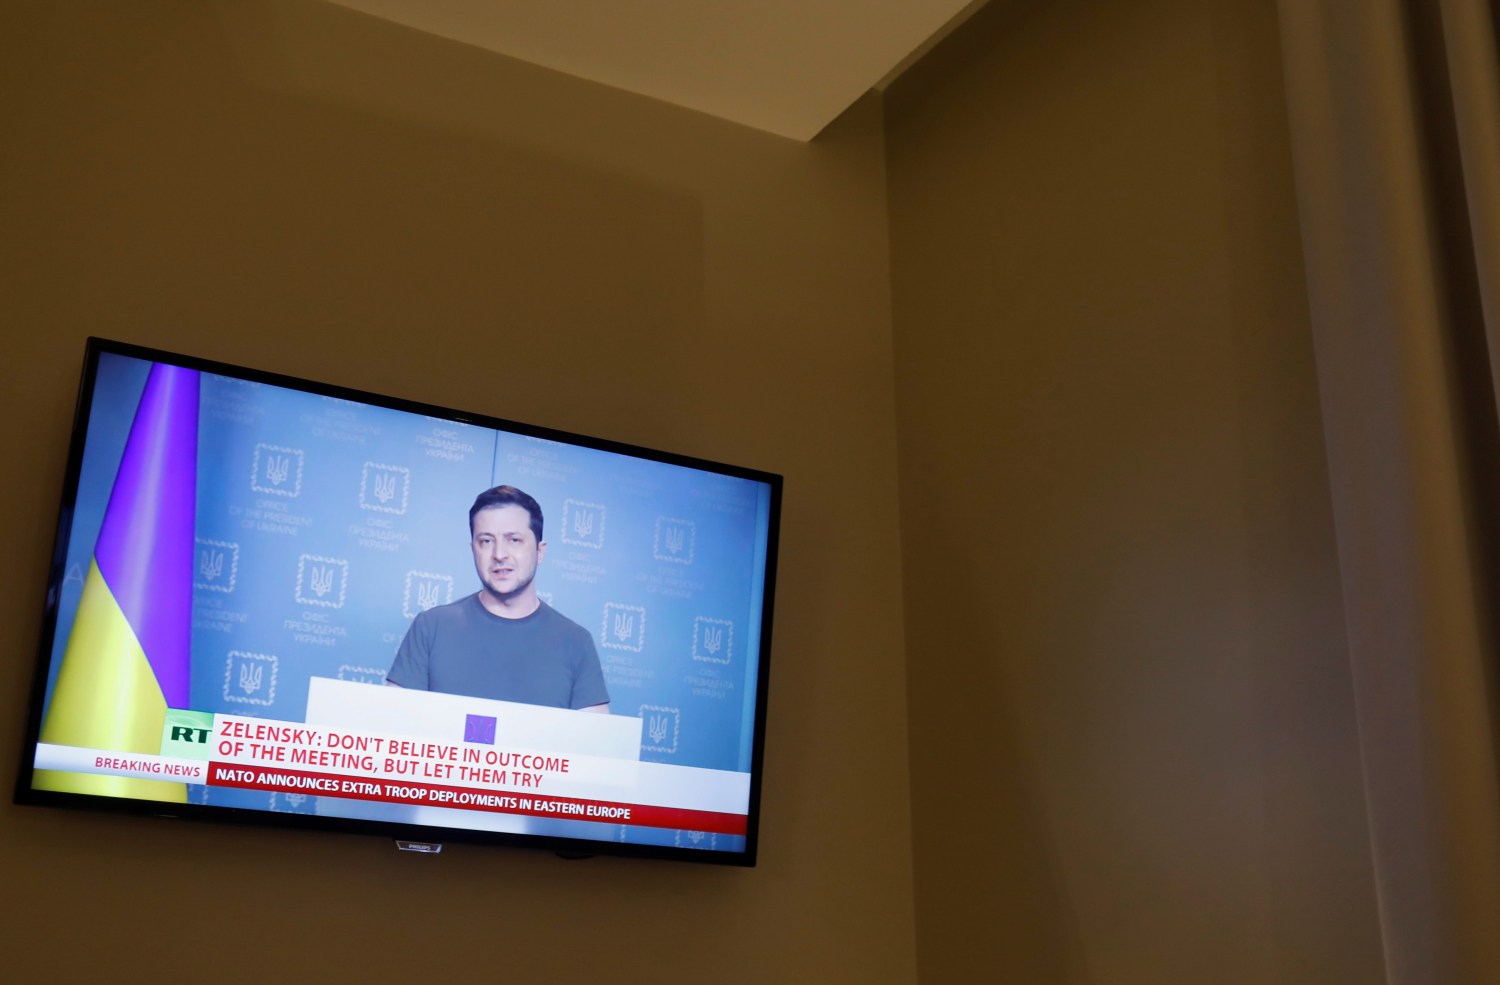 Ukrainian President Volodymyr Zelenskiy is seen on a TV screen in a hotel during a live news broadcast of the Russia Today (RT) channel TV